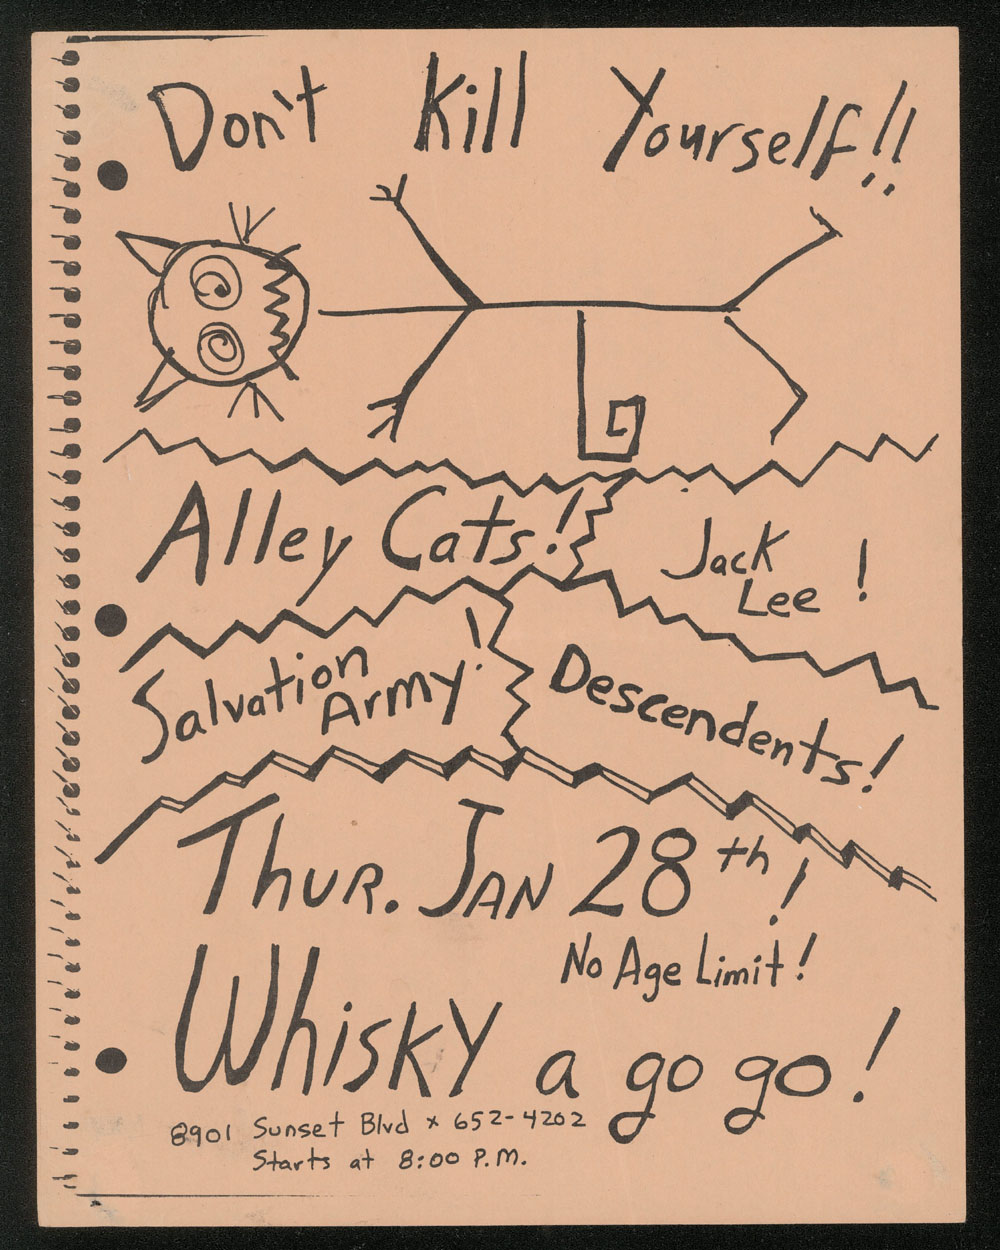 ALLEY CATS w/ Jack Lee, Salvation Army, Descendents at Whisky-A-Go-Go